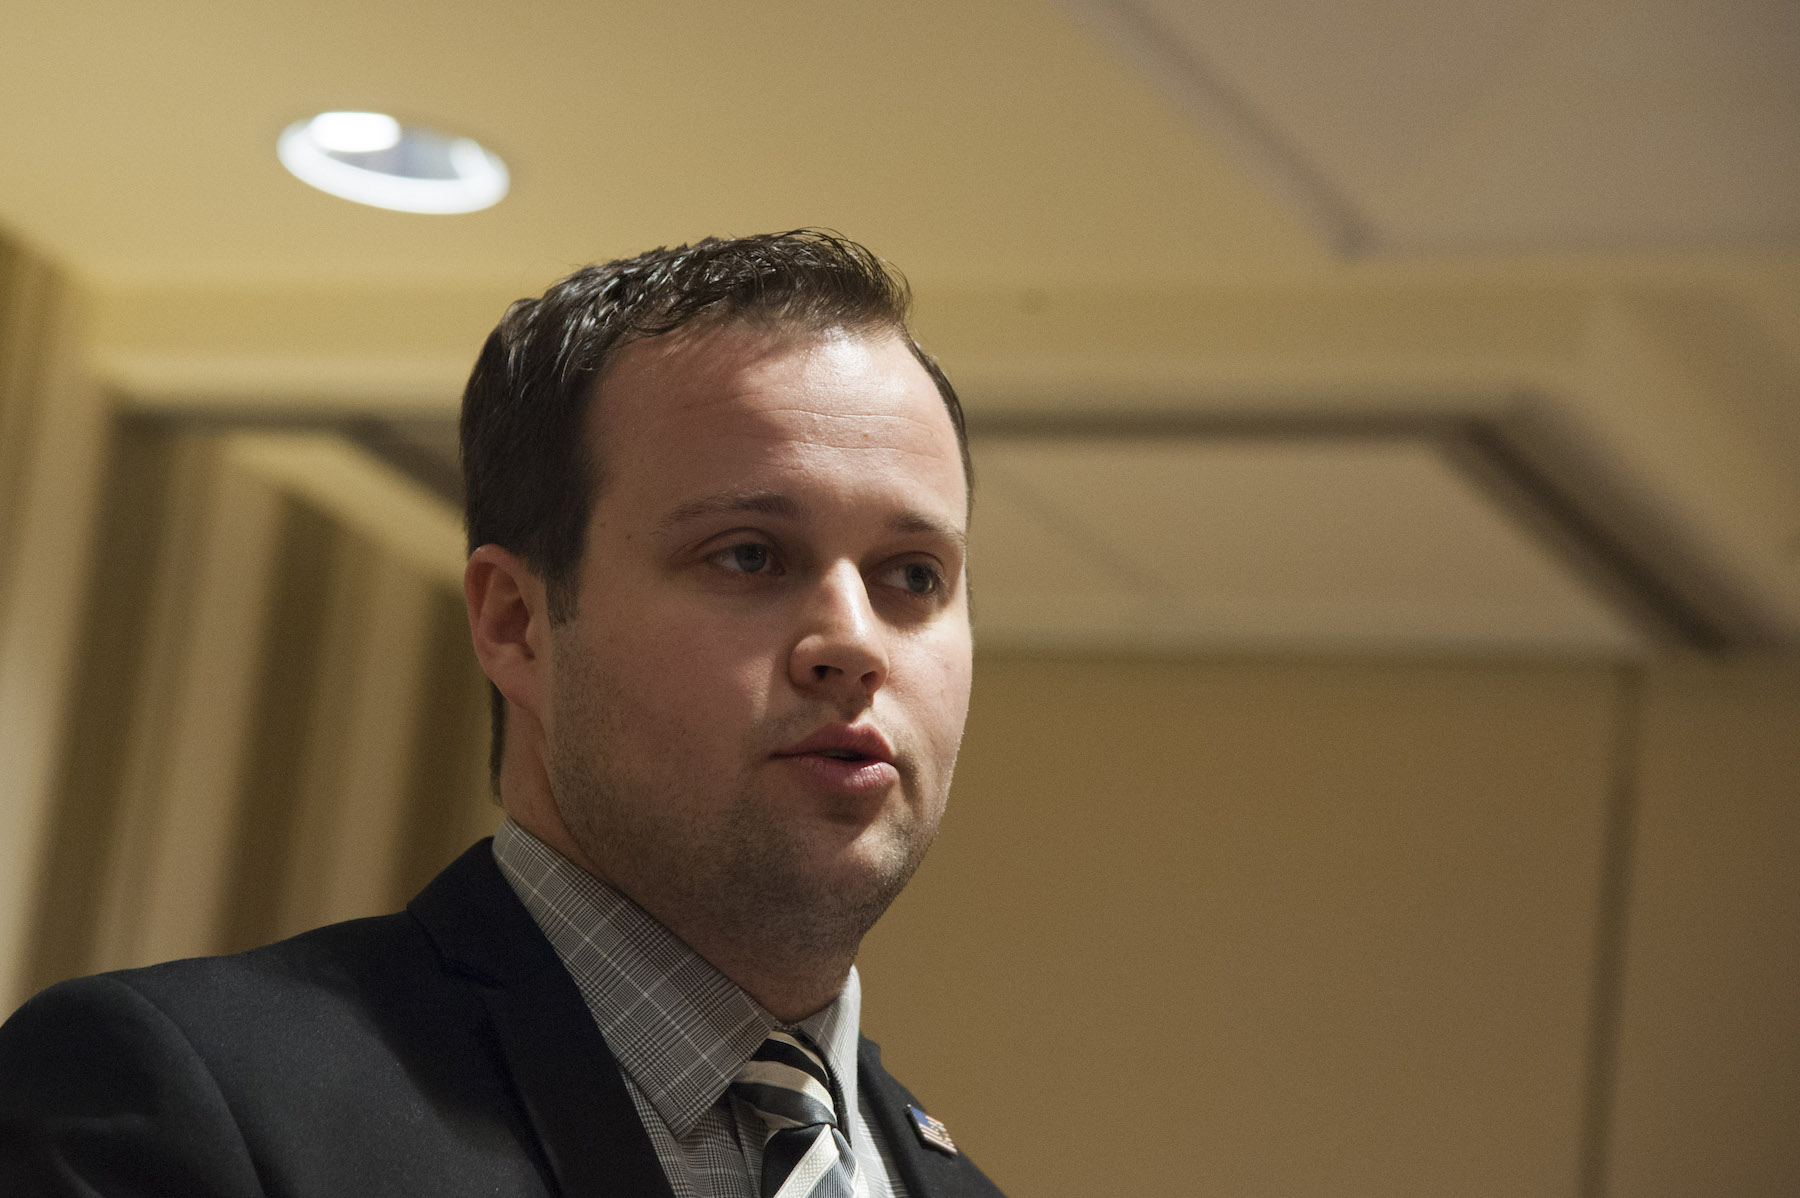 A close-up of Duggar family member Josh Duggar's face speaking at a conference